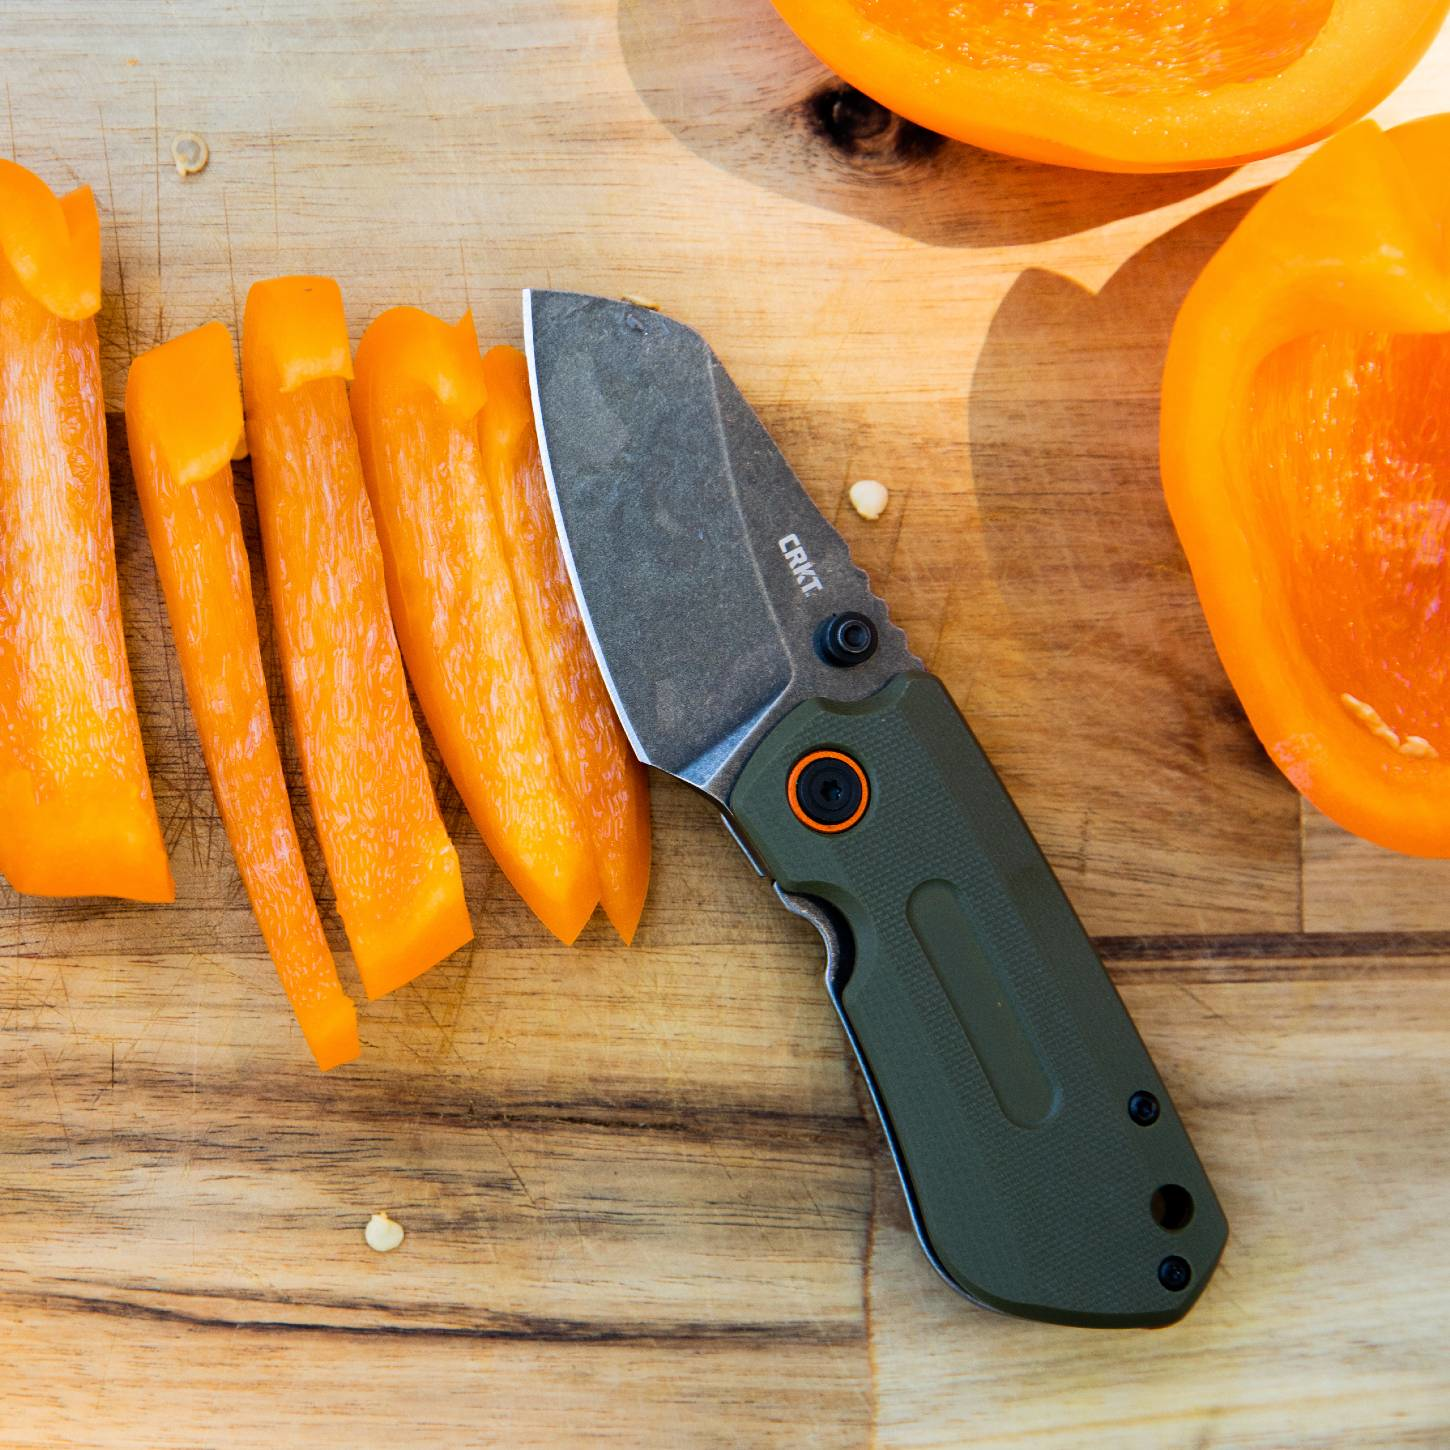 CRKT Knife on cutting board surround by peppers.